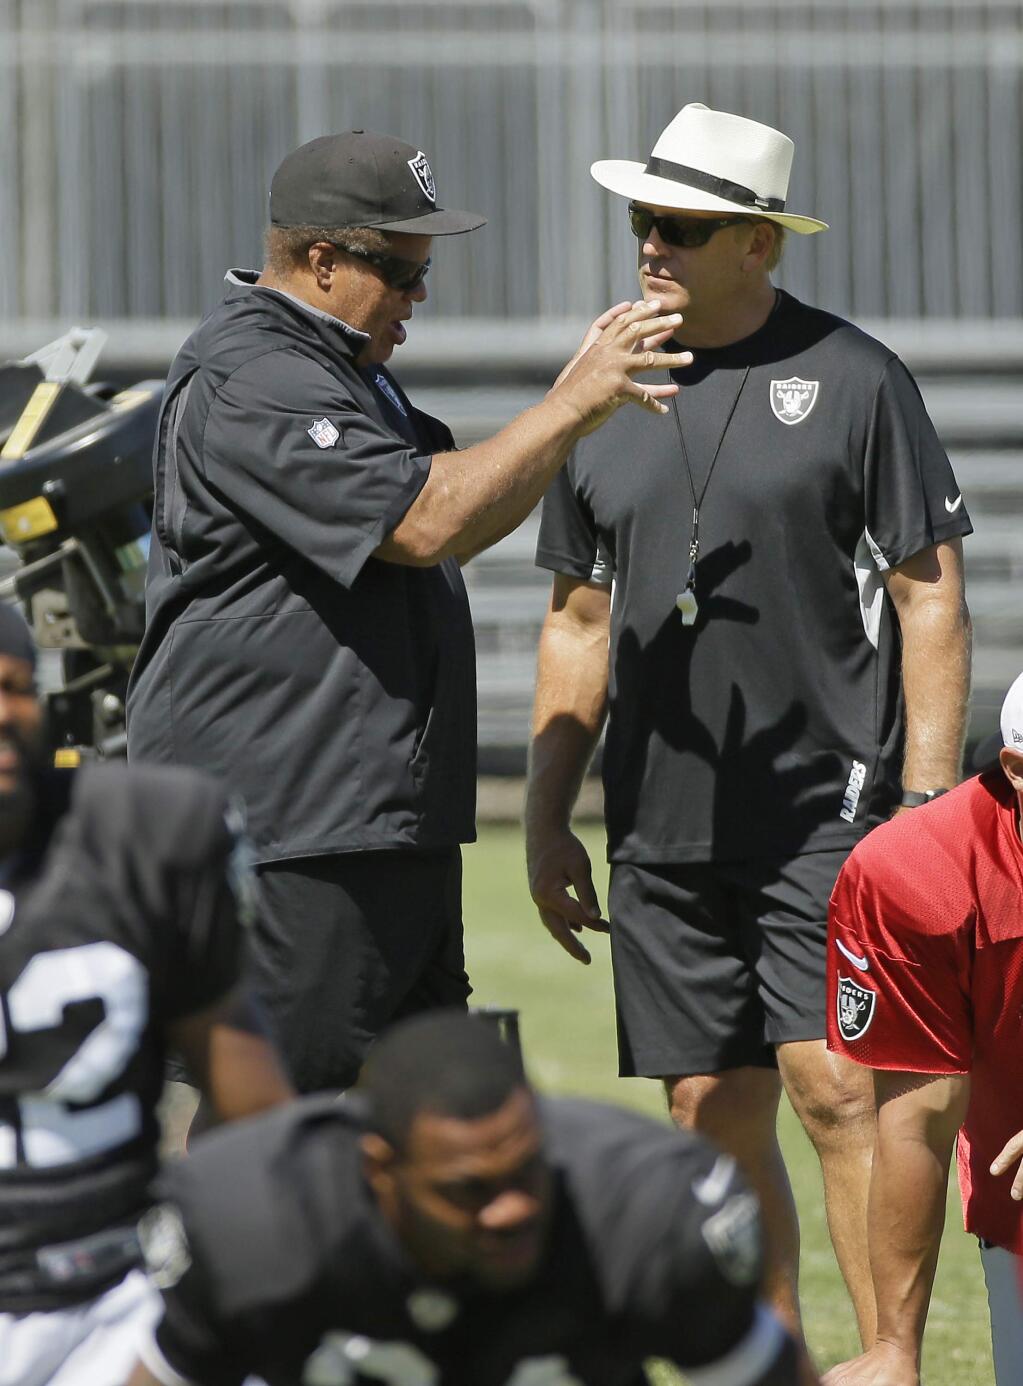 Oakland Raiders general manager Reggie McKenzie, left, talks with head coach Jack Del Rio, right, during their football training camp Monday, Aug. 3, 2015, in Napa, Calif. (AP Photo/Eric Risberg)